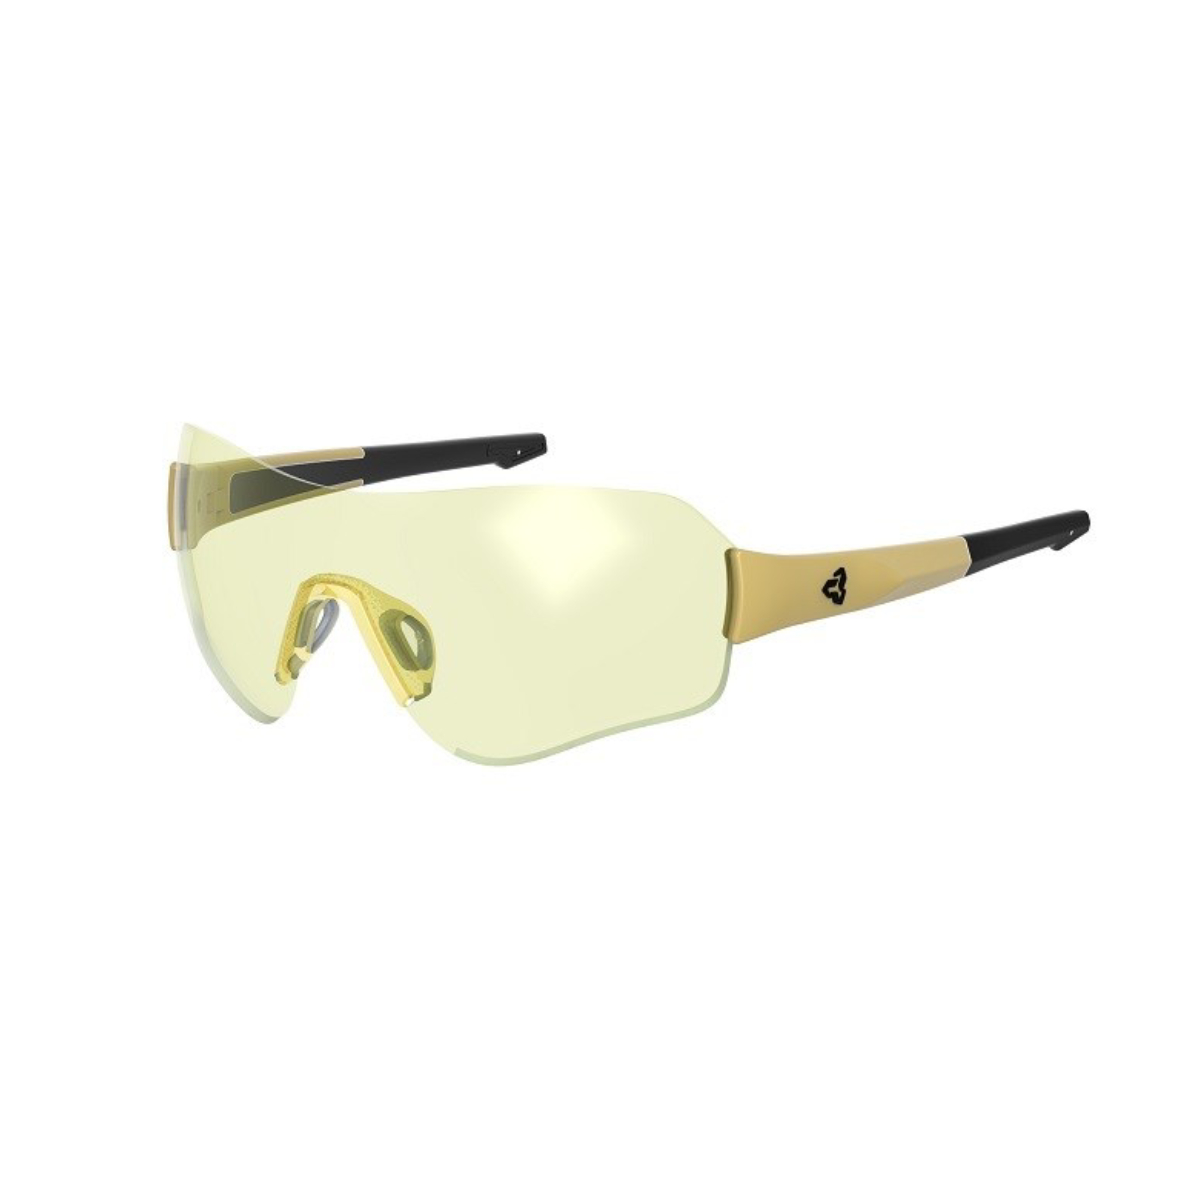 LUNETTE RYDERS FITZ POLY OR METALIC MT LENTILLE JAUNE ANIT BUEE